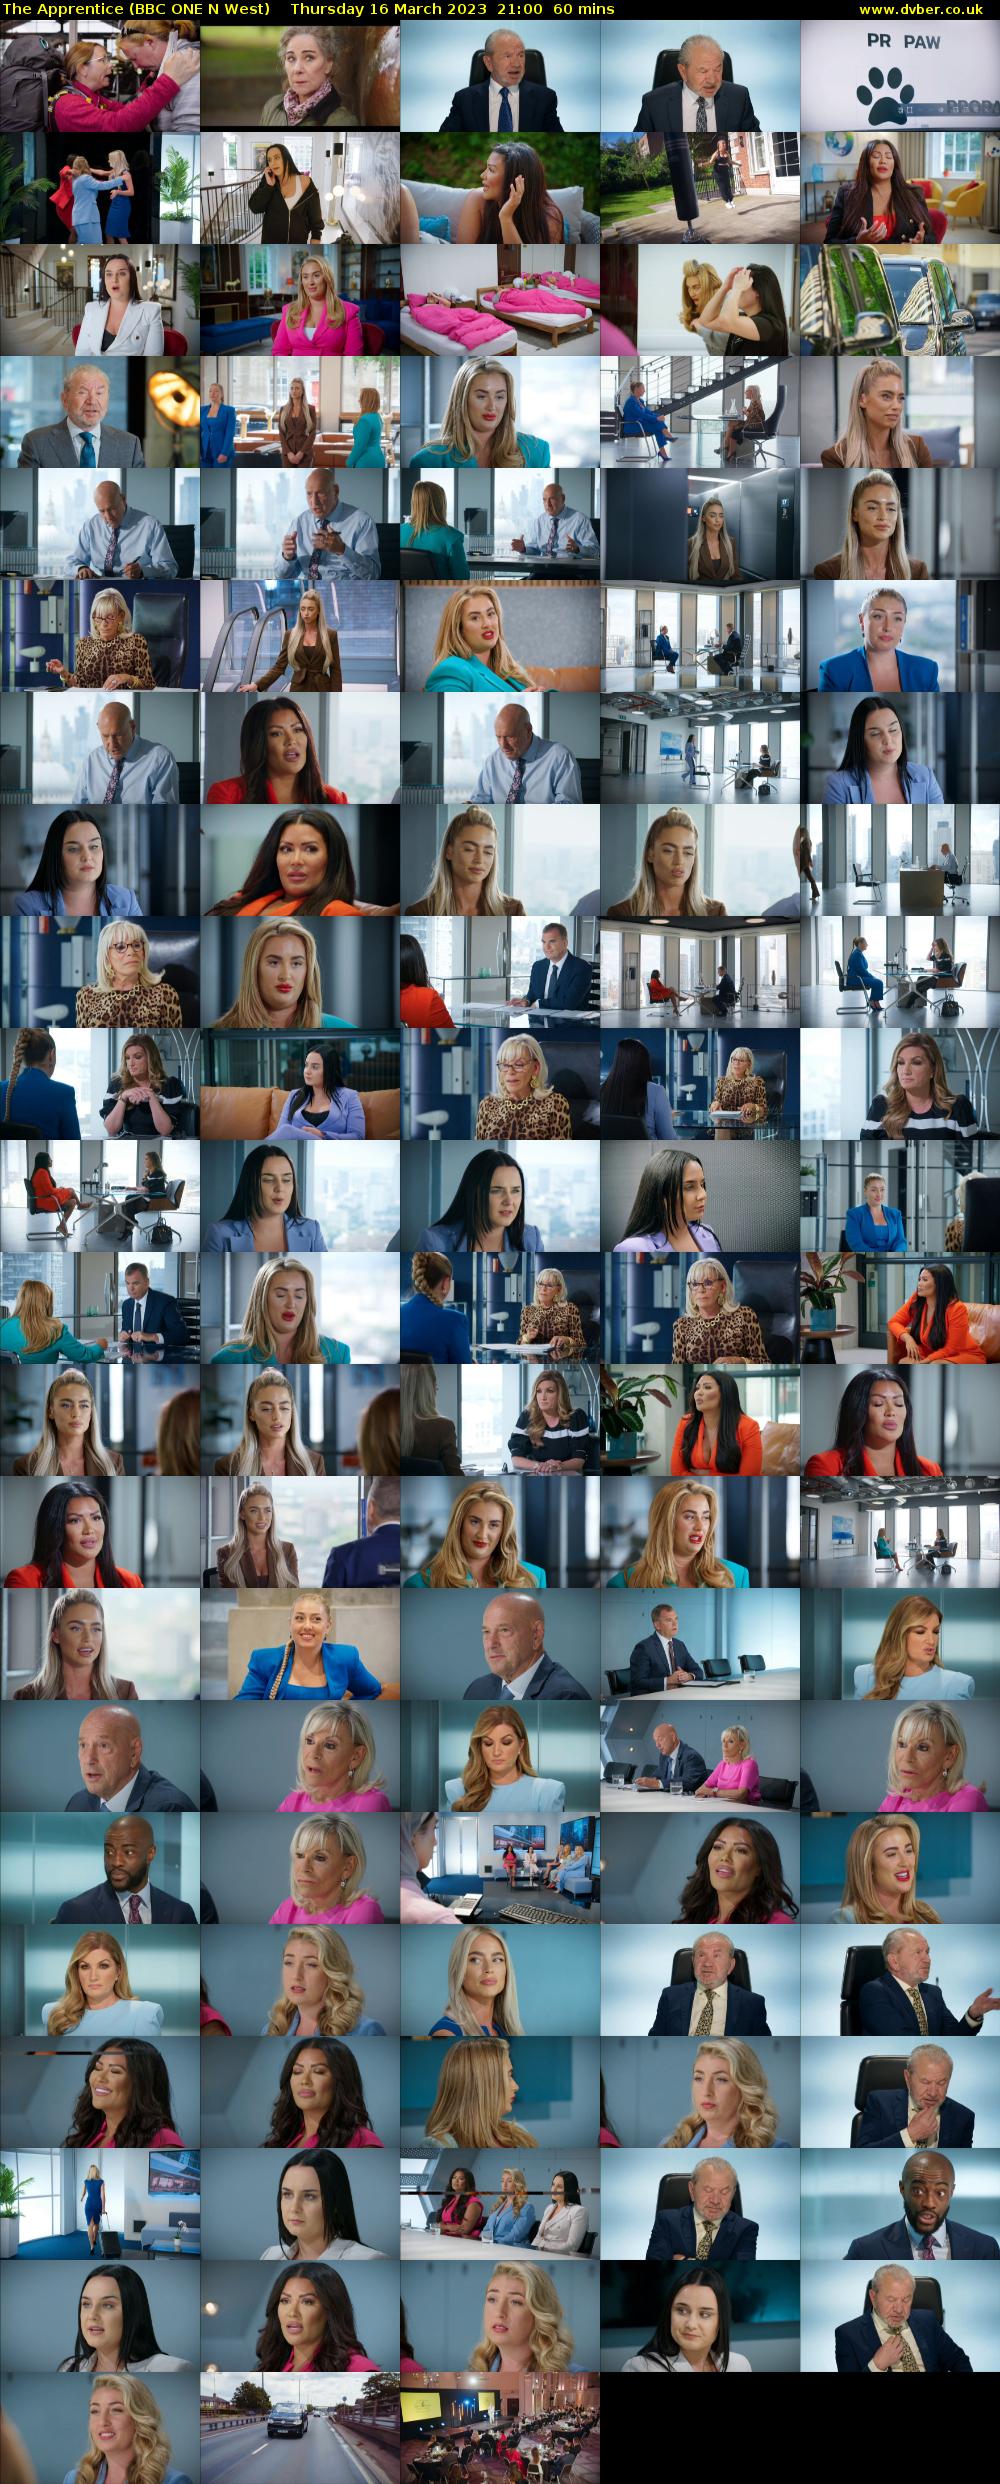 The Apprentice (BBC ONE N West) Thursday 16 March 2023 21:00 - 22:00